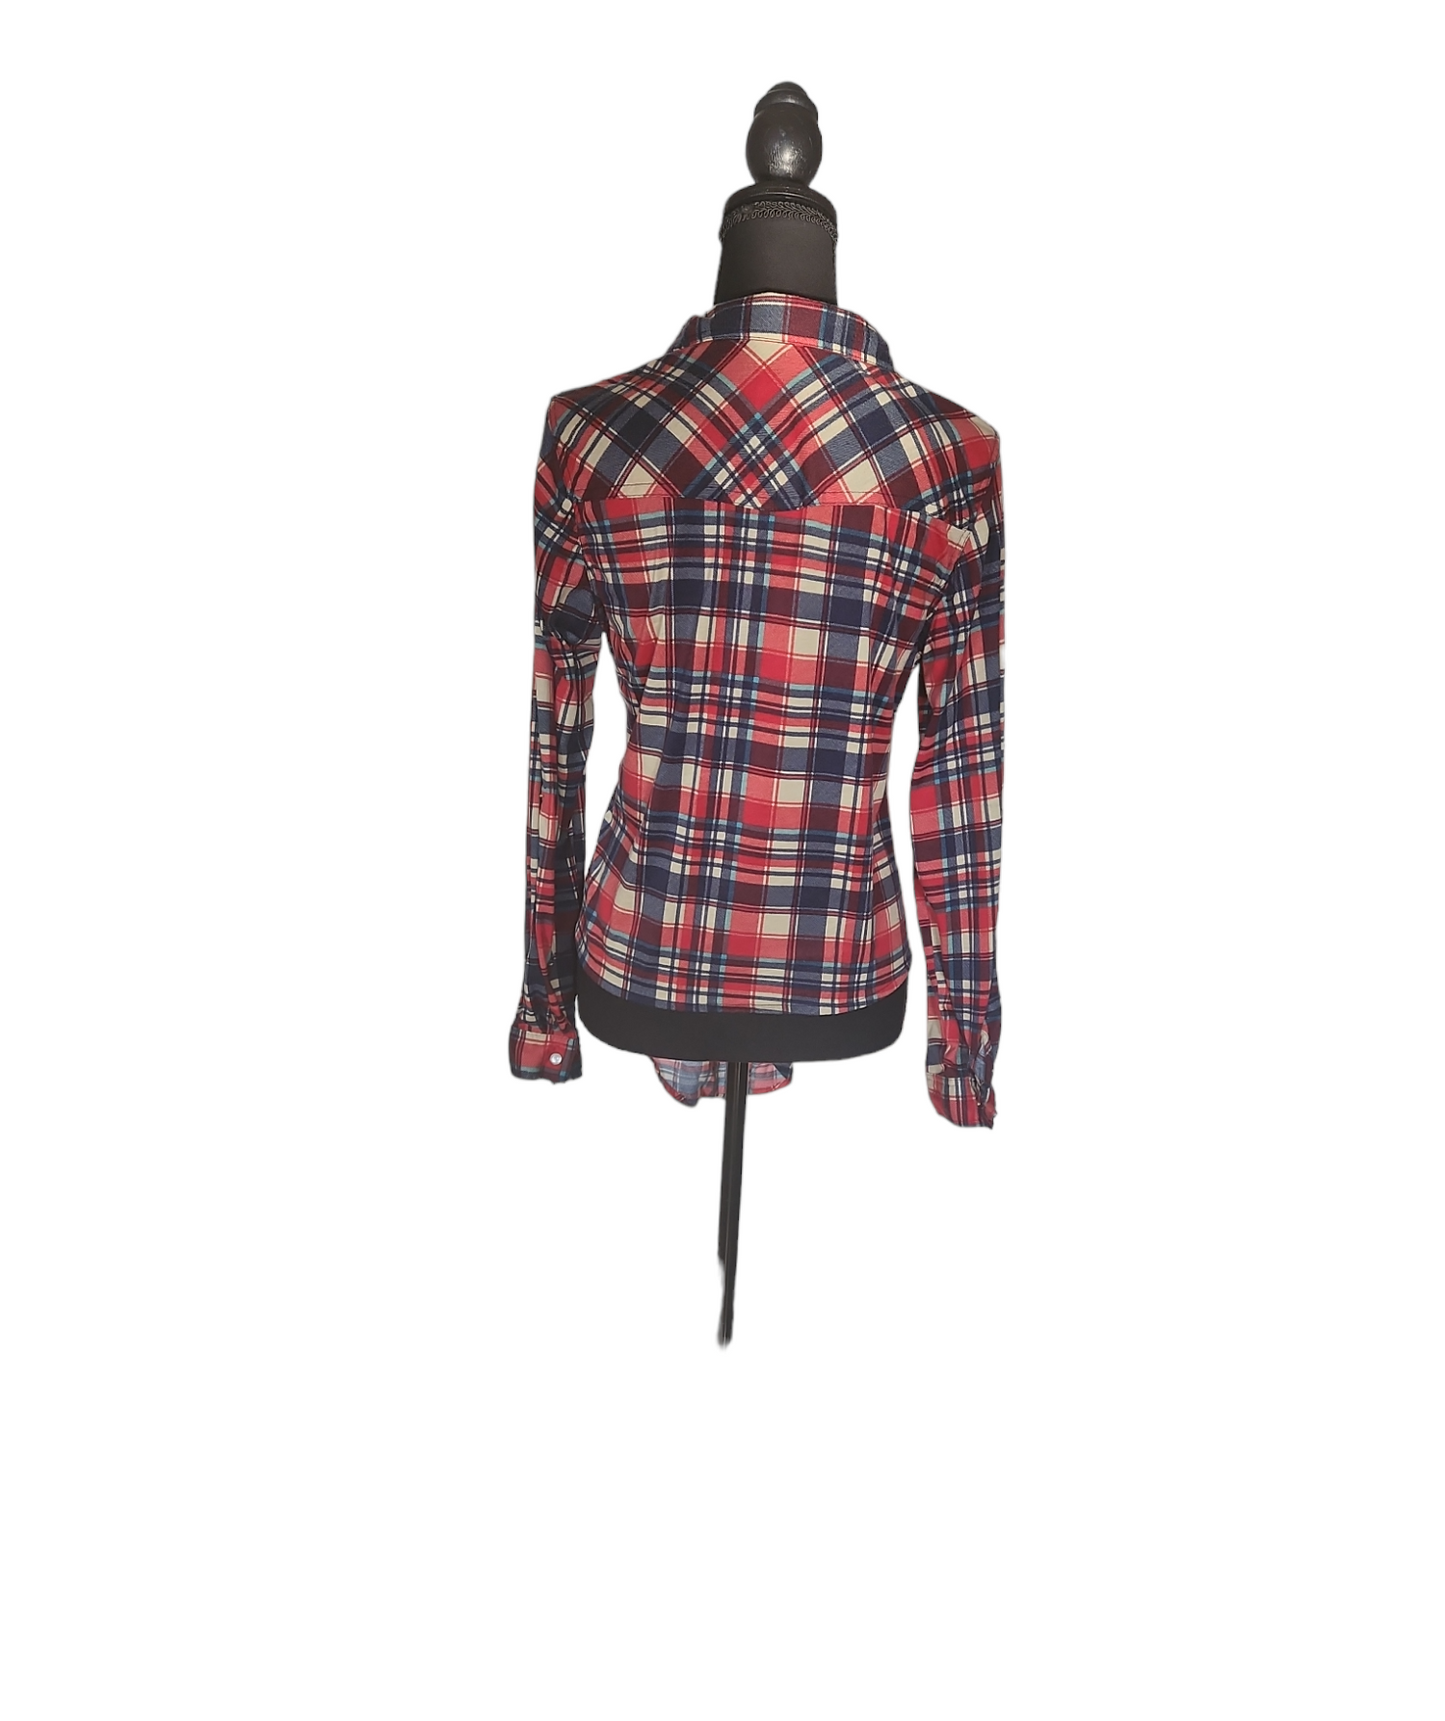 Passport - Tie Knot Red Beige and Blue Plaid Shirt